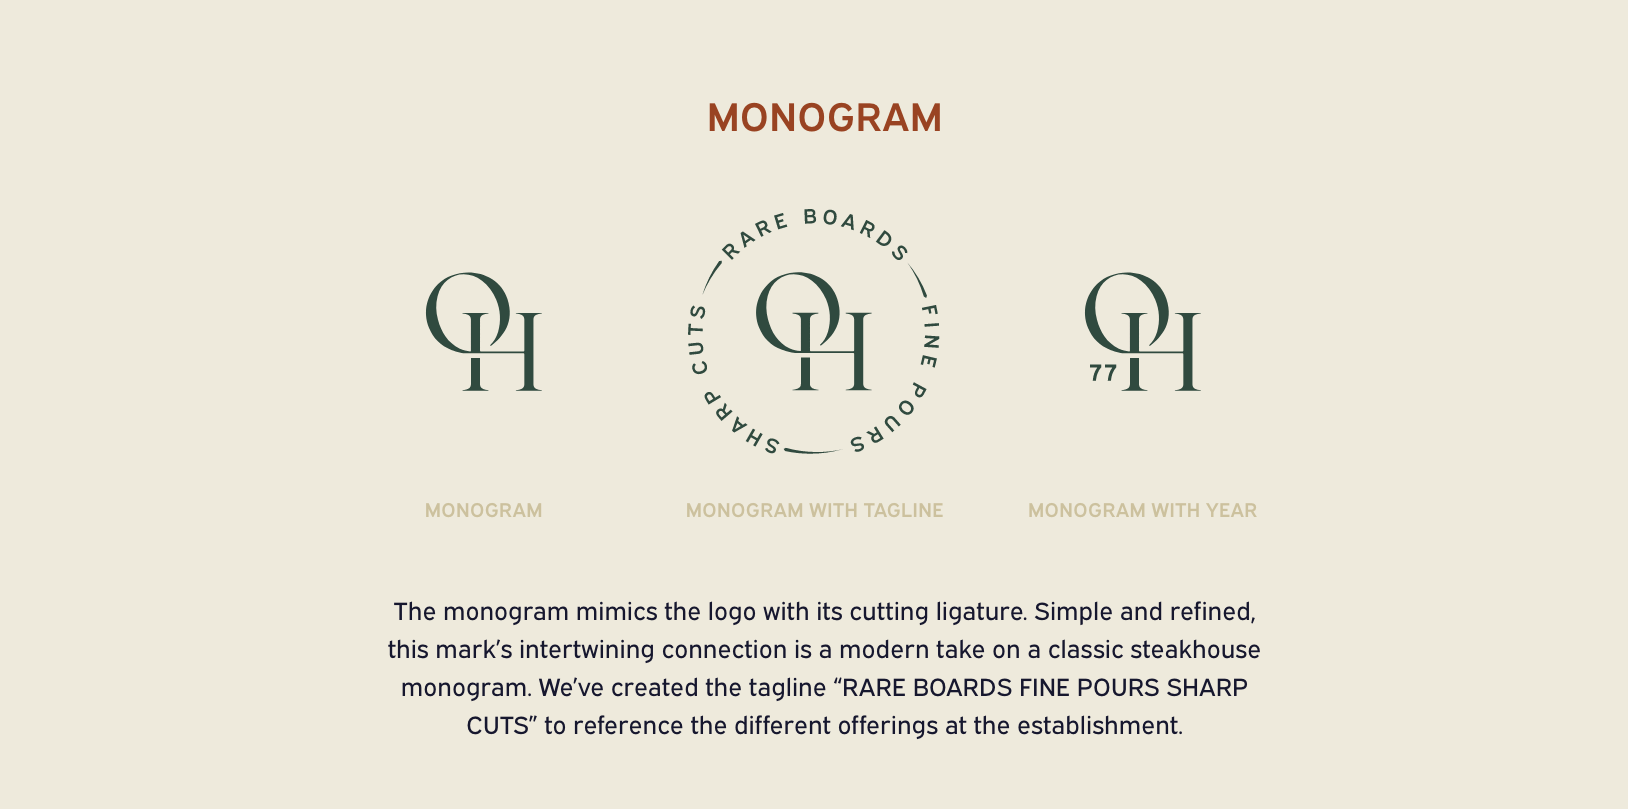 Old Hickory monograms showing three versions, monogram, monogram with tagline and monogram with date. below the text reads: The monogram mimics the logo with its cutting ligature. Simple and refined, this mark’s intertwining connection is a modern take on a classic steakhouse monogram. We’ve created the tagline “RARE BOARDS FINE POURS SHARP CUTS” to reference the different offerings at the establishment.